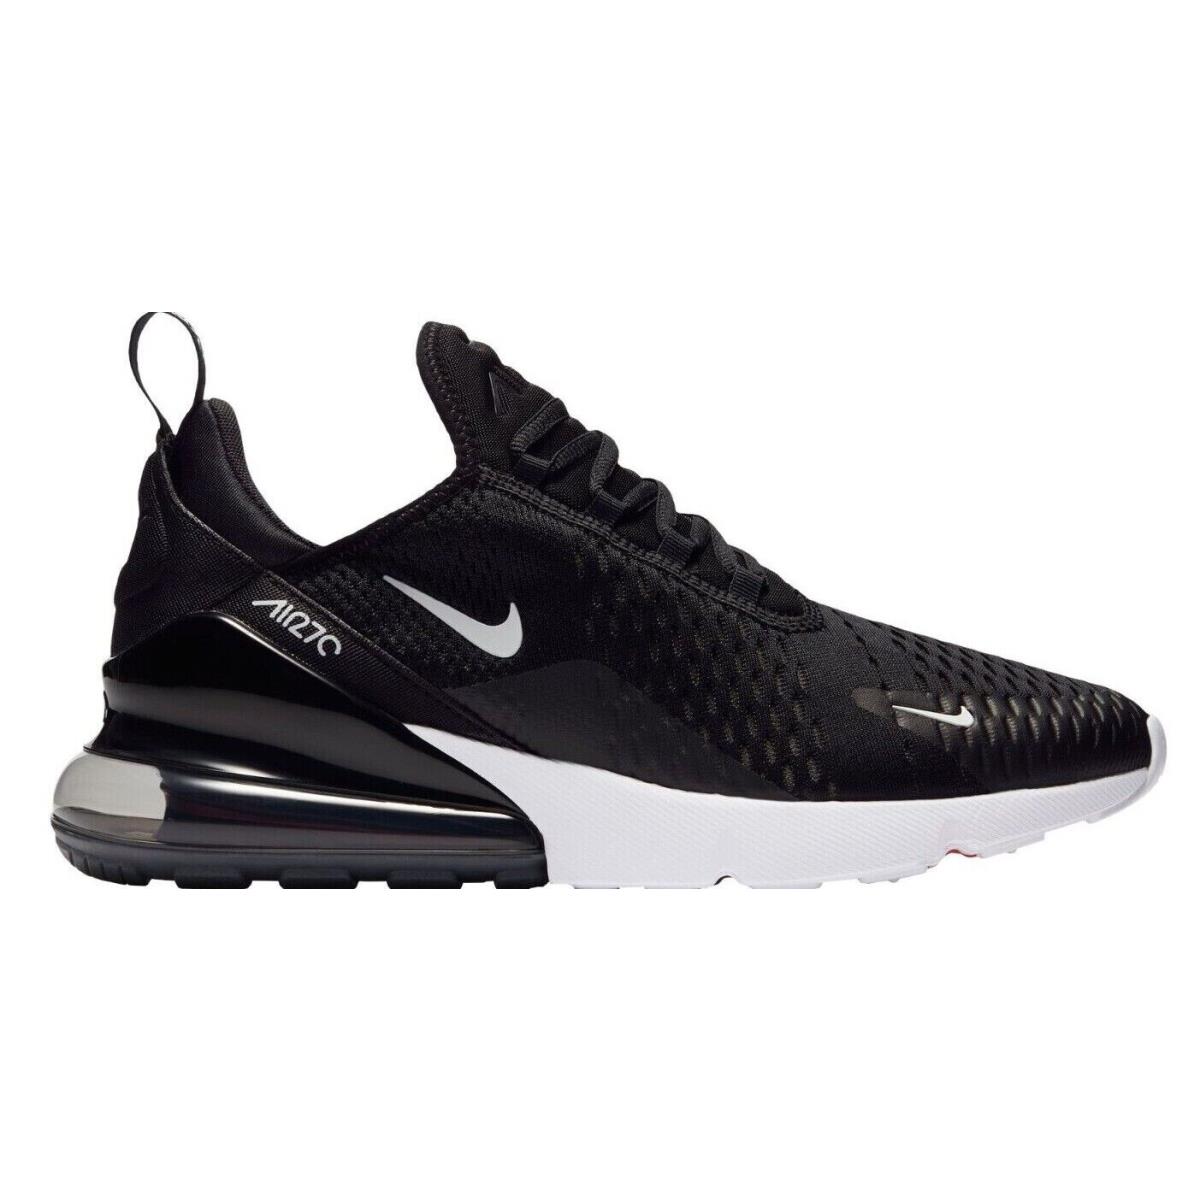 Nike Air Max 270 Men`s Running Casual Shoes US Size 8-13 All Colors Black/Anthracite/White/Solar Red